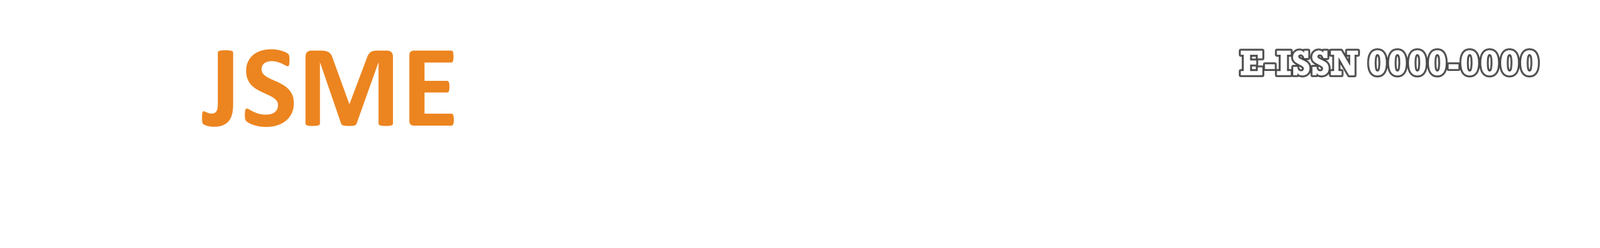 Journal of Science and mathematics education